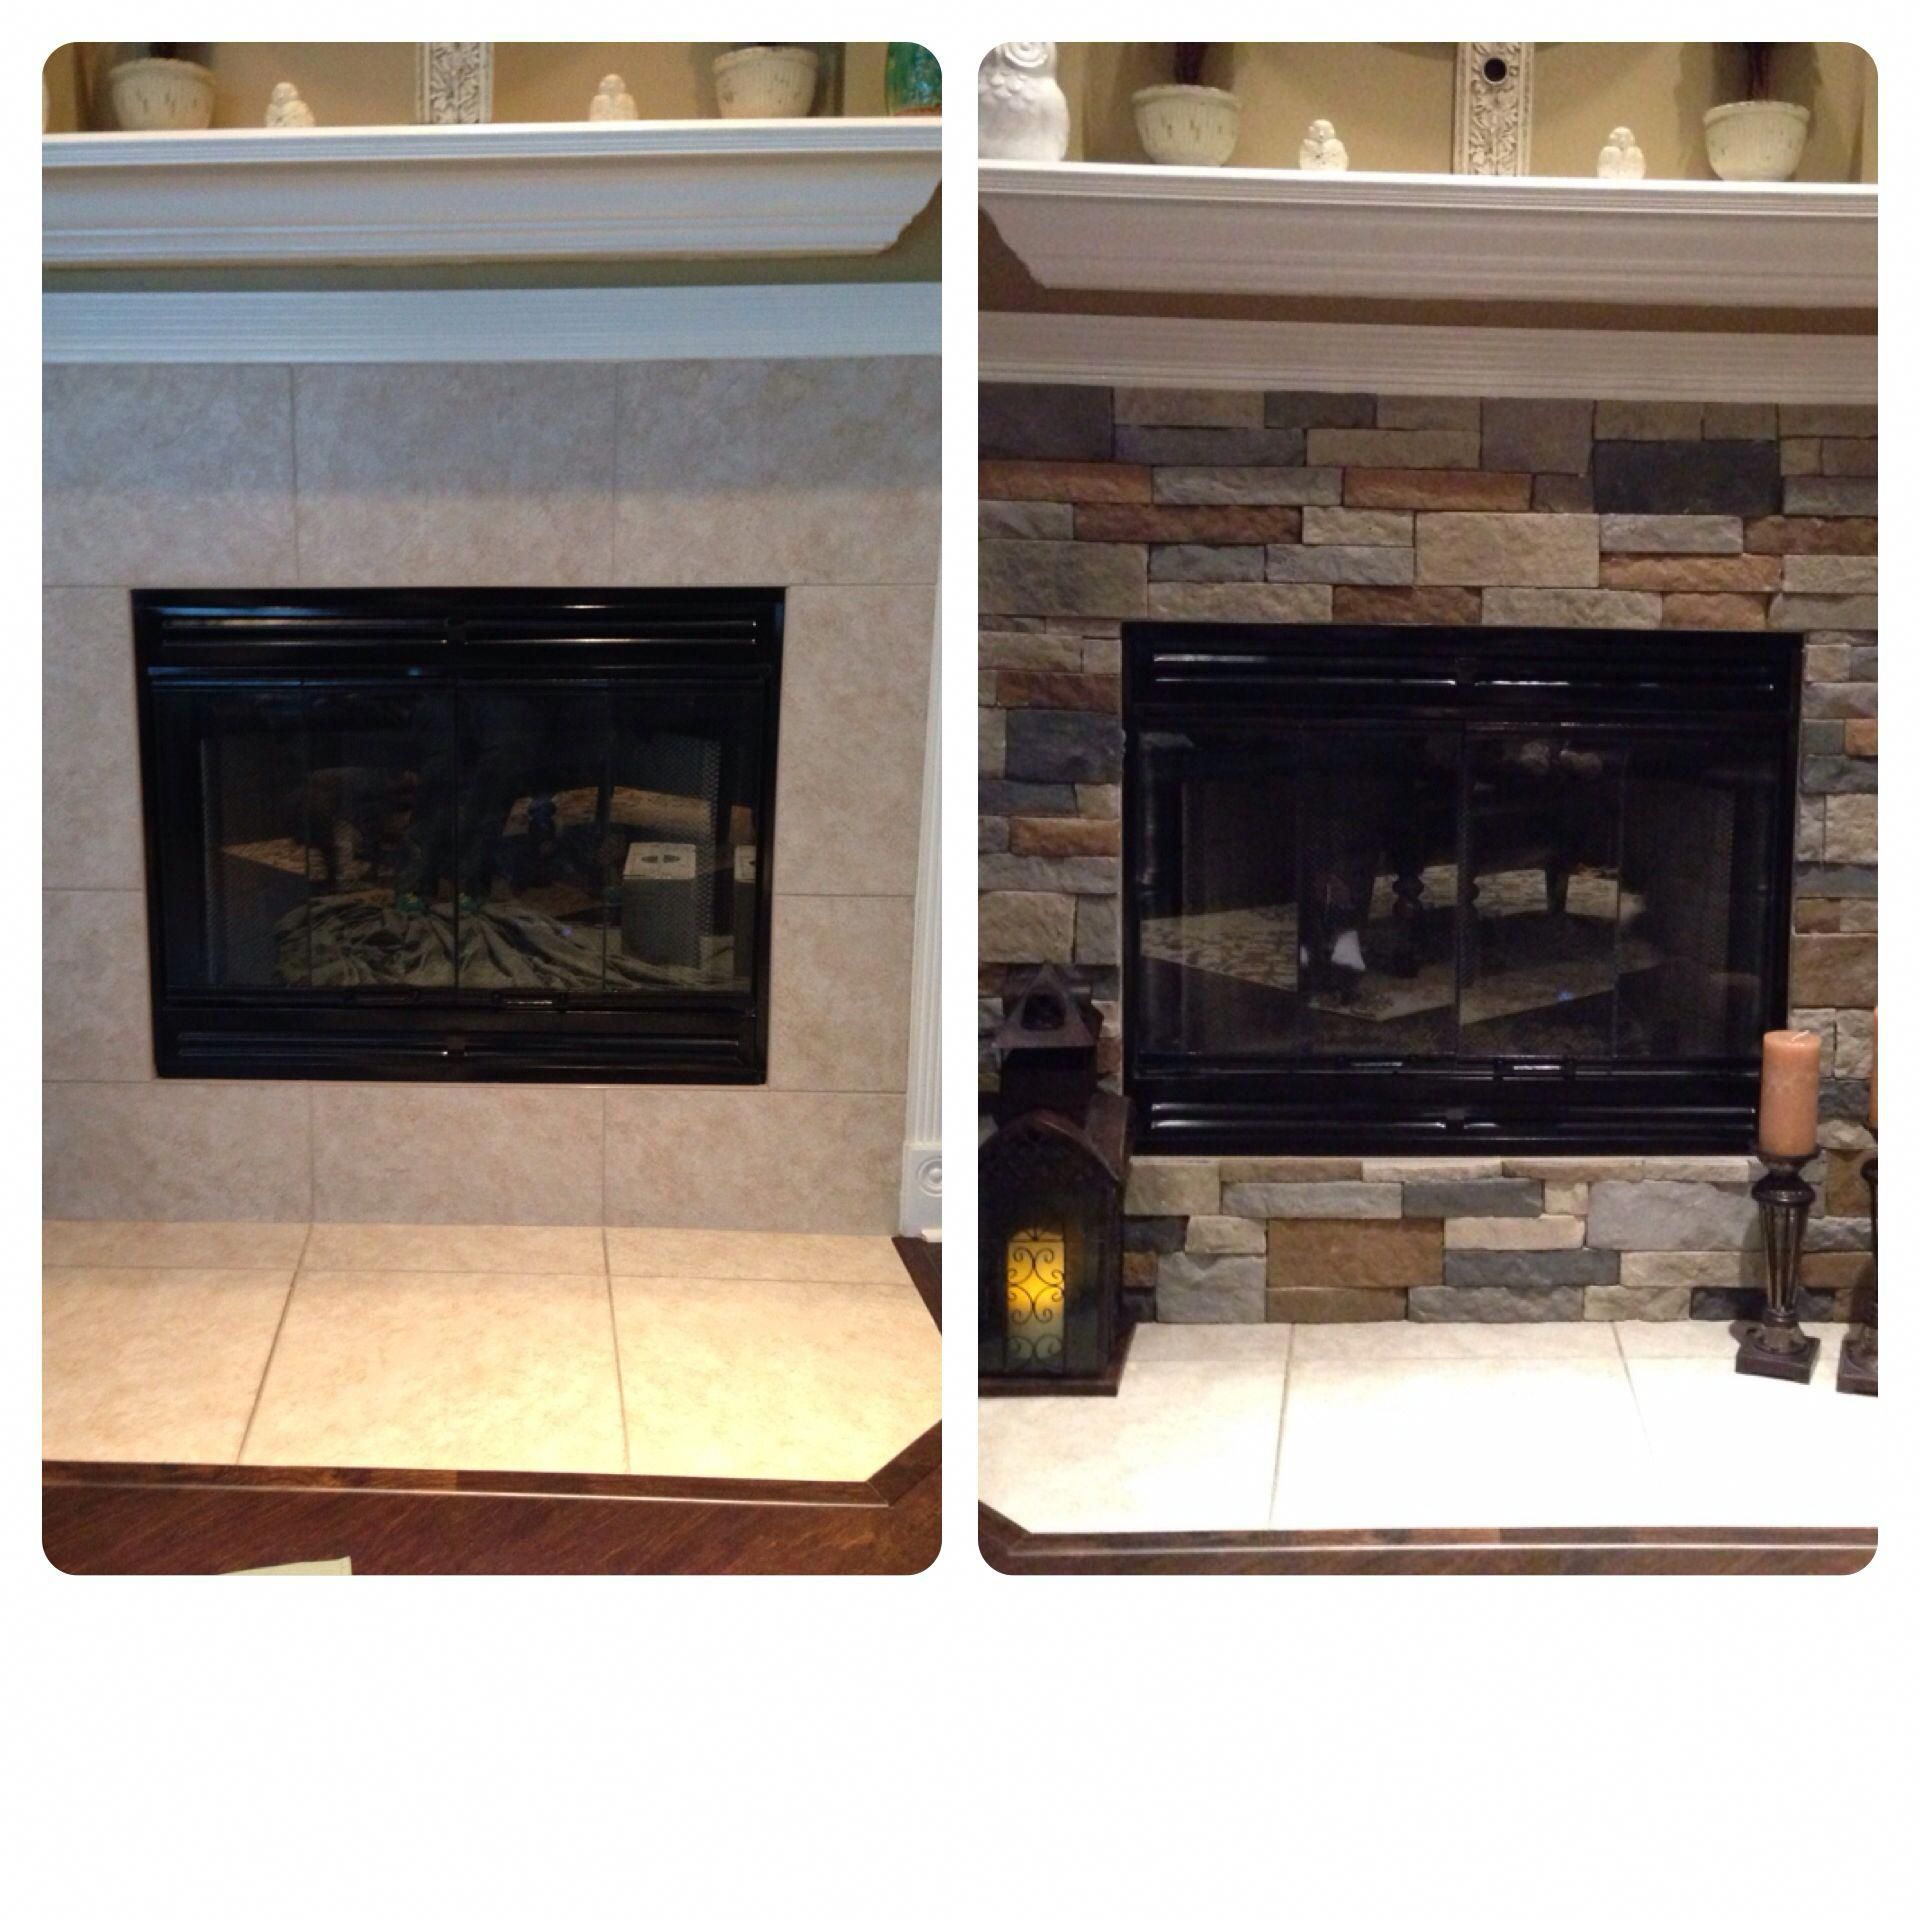 Refurbish Fireplace Lovely Airstone Remodel On My Fireplace Pletely Easy Diy